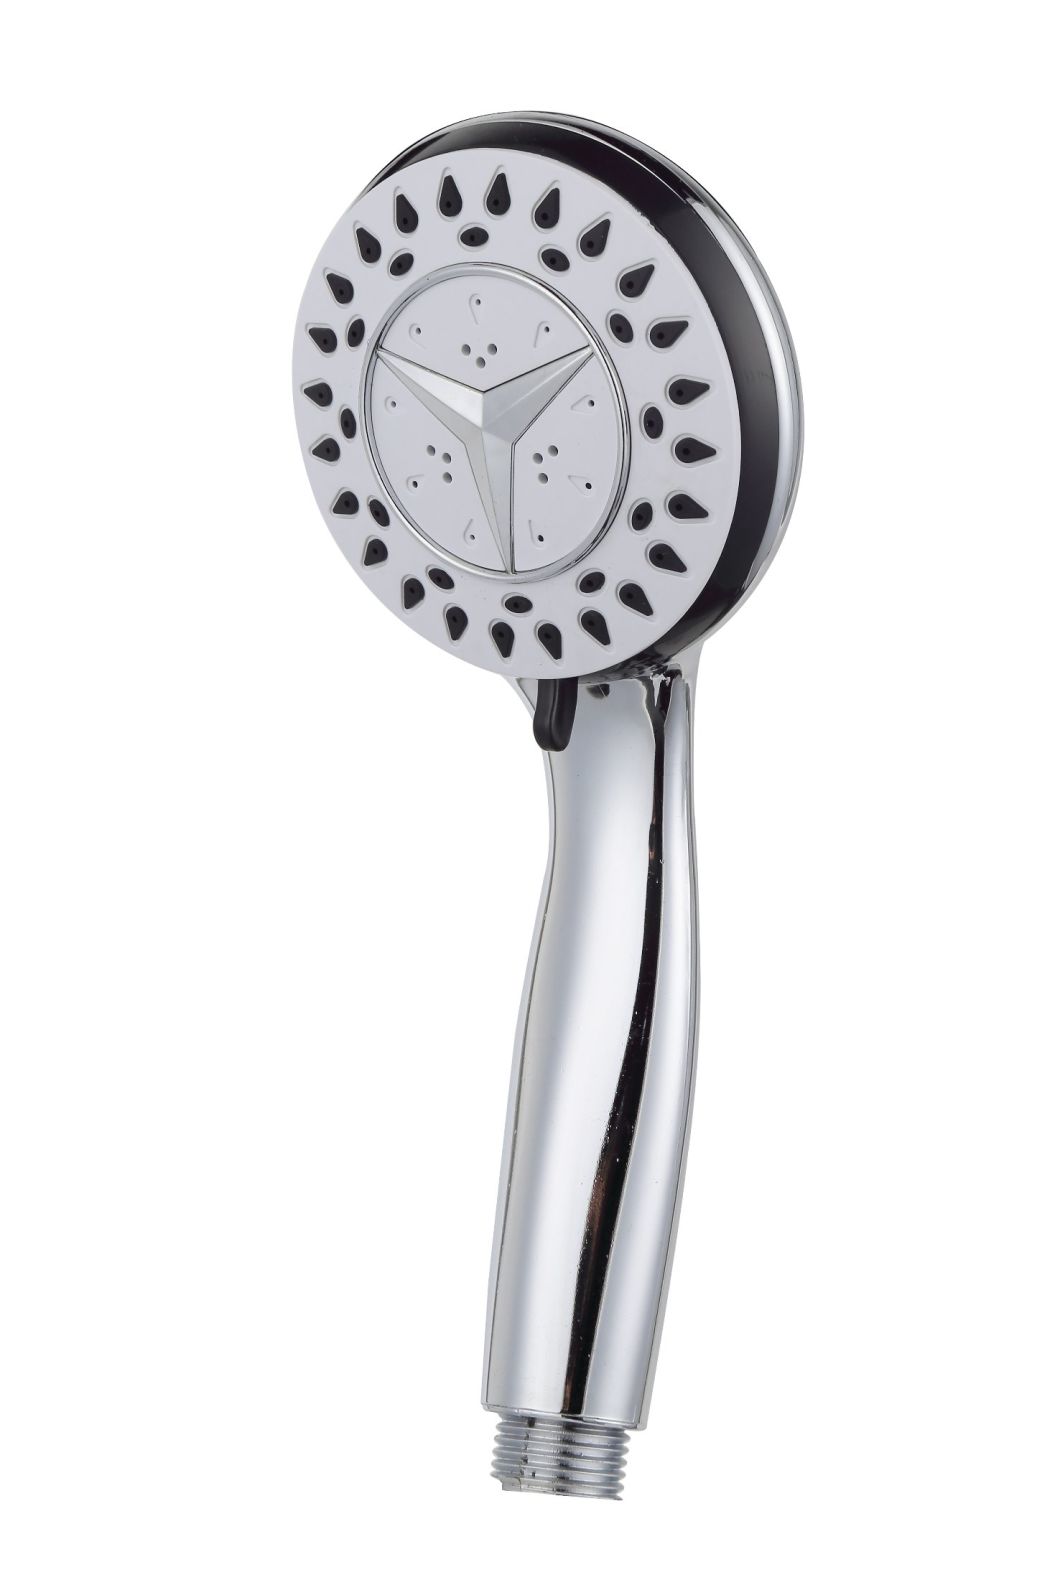 Hot Sell Hand Held Shower Head Made in China Lm-3015gh